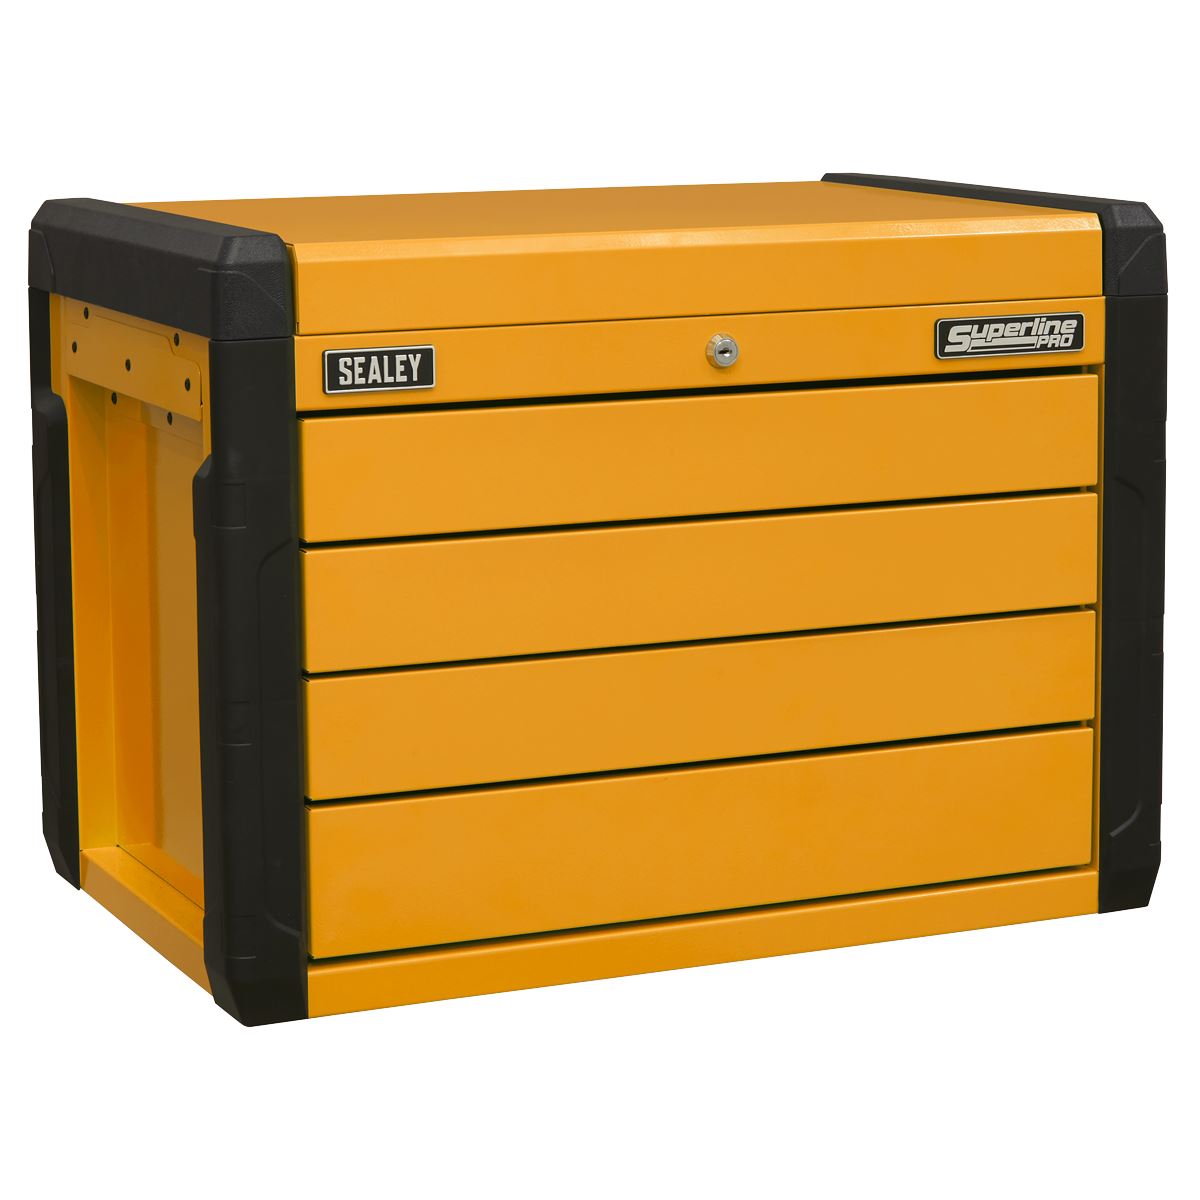 Sealey Superline Pro 4-Drawer Push-to-Open Topchest with Ball-Bearing Slides - Orange